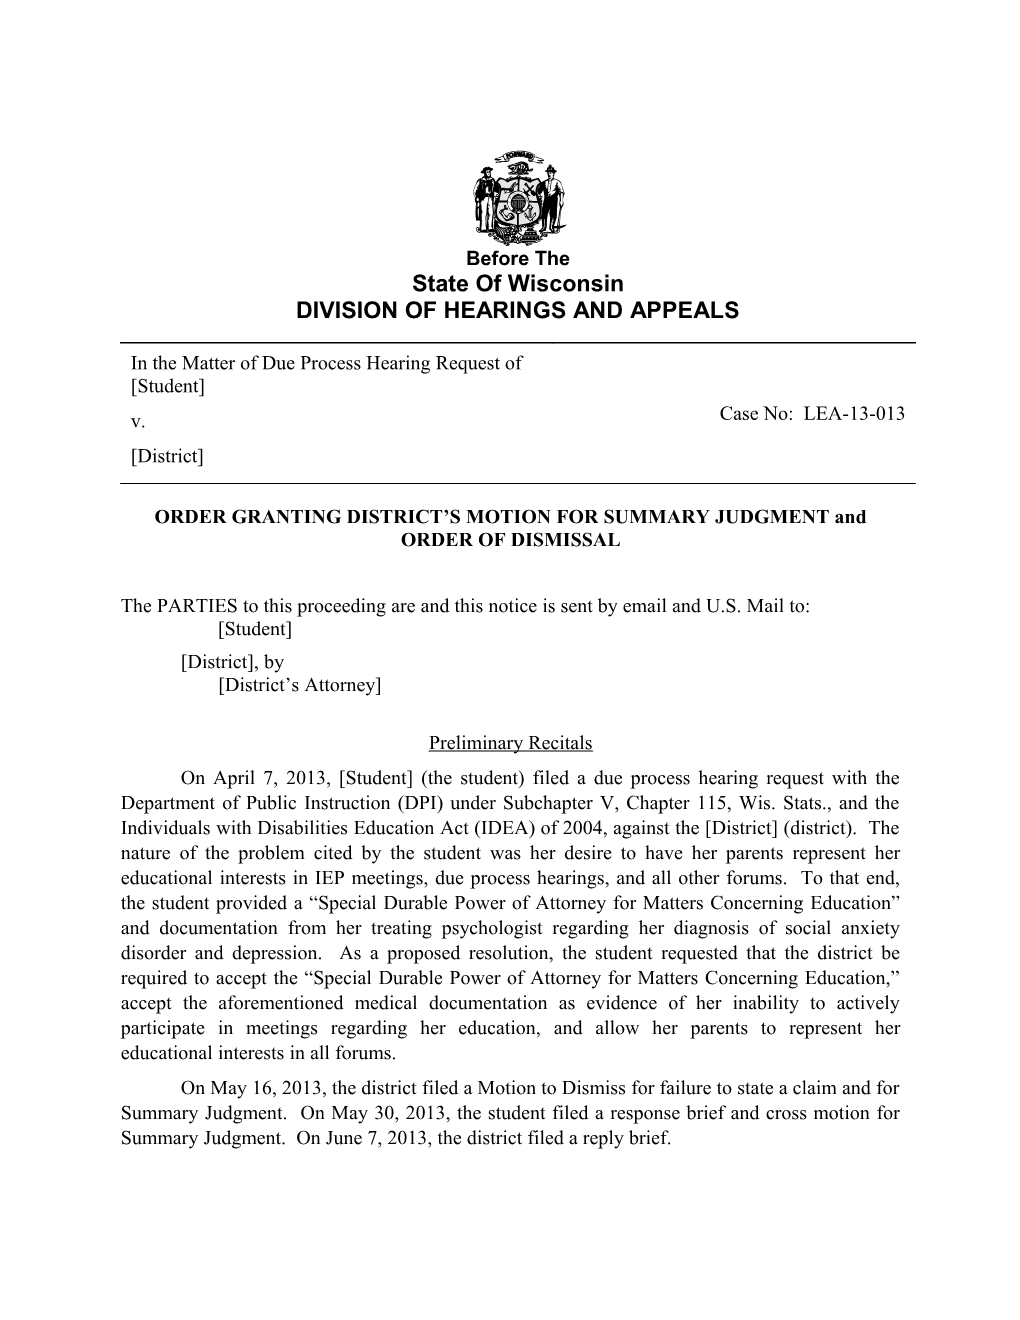 ORDER GRANTING DISTRICT S MOTION for SUMMARY JUDGMENT and ORDER of DISMISSAL